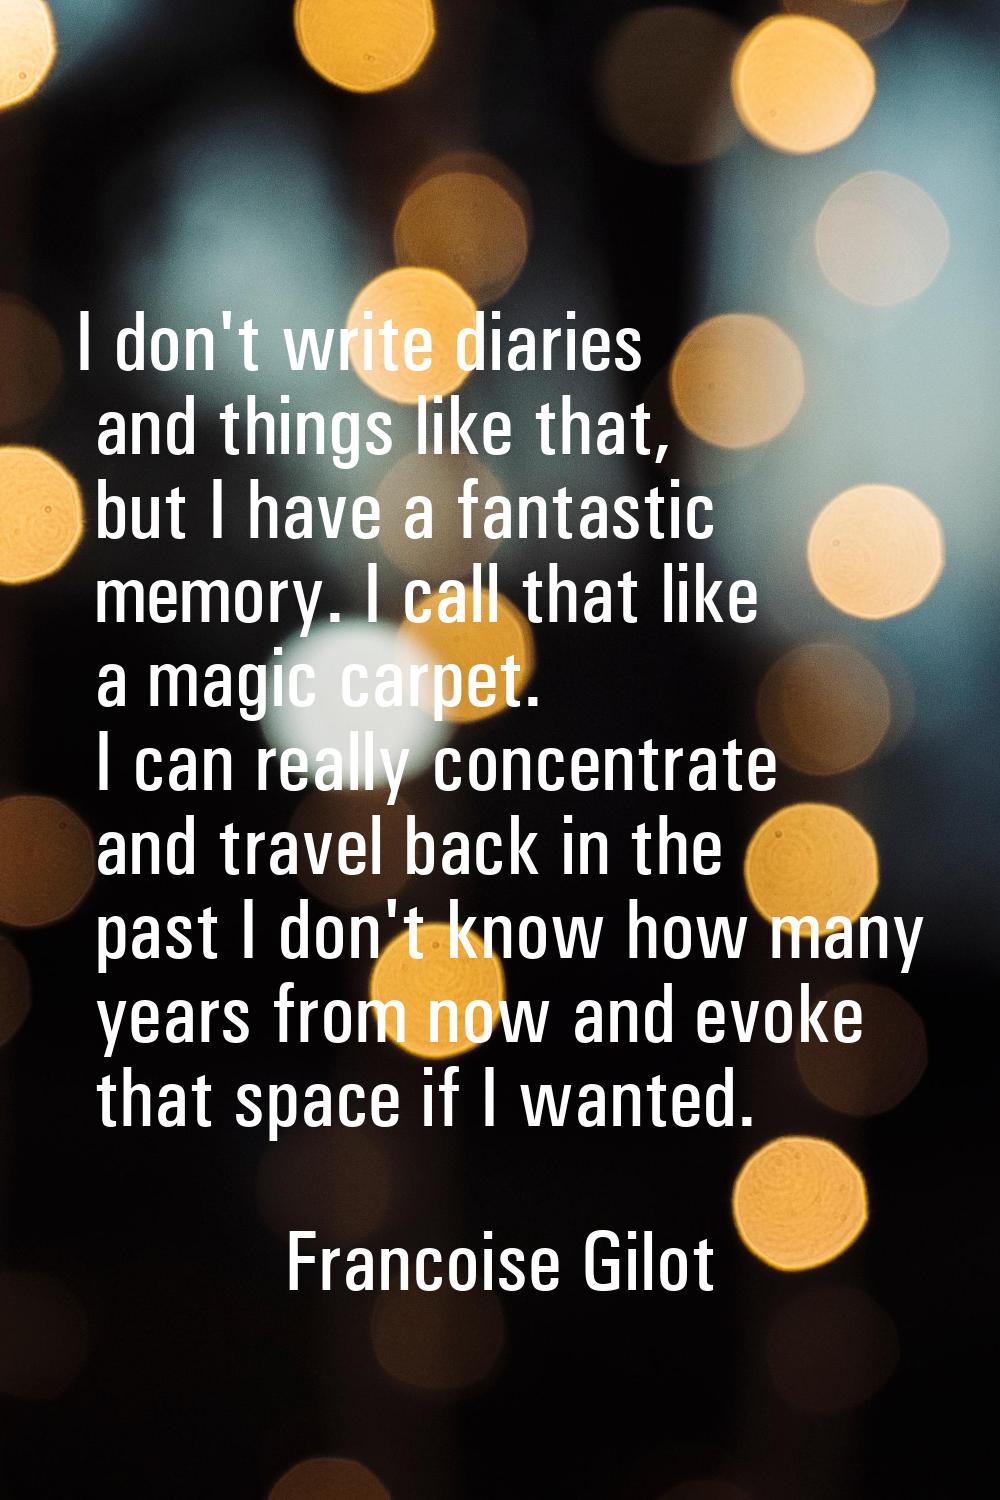 I don't write diaries and things like that, but I have a fantastic memory. I call that like a magic